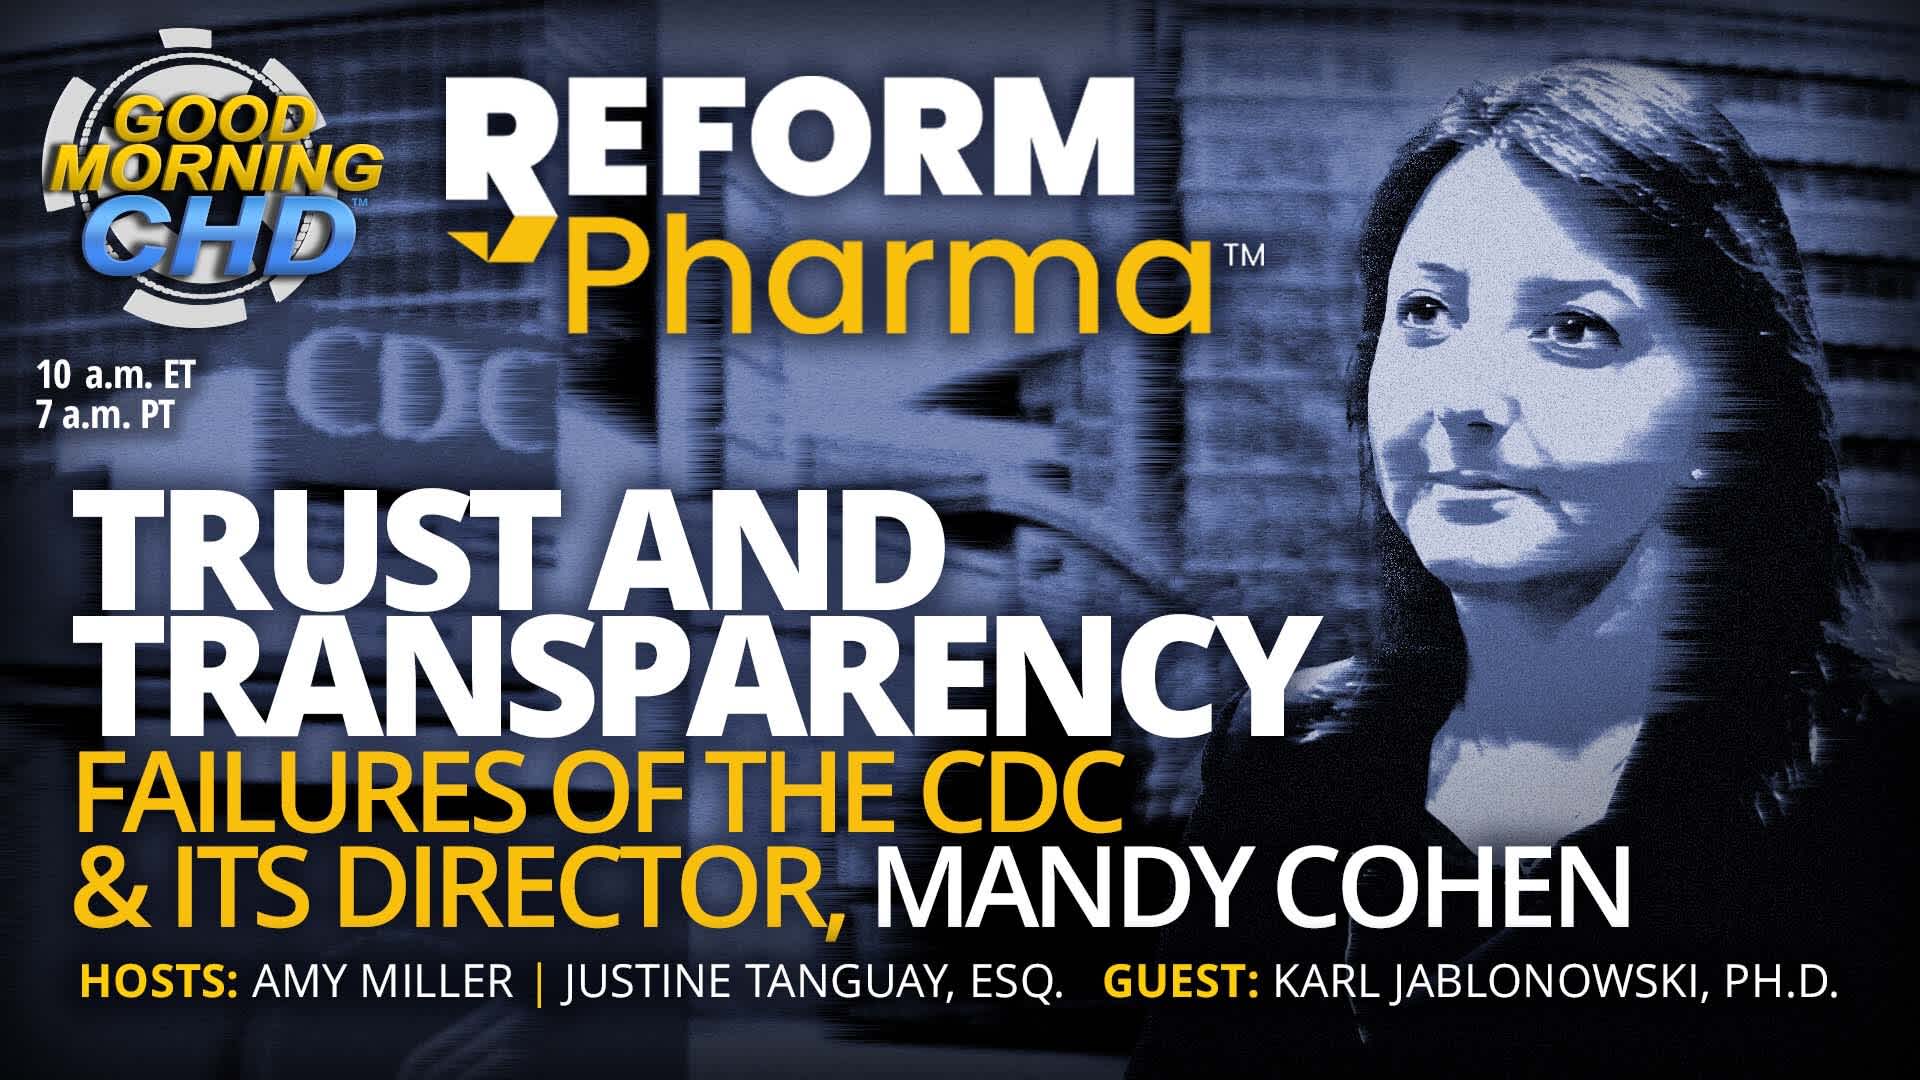 Trust and Transparency  - Failures of the CDC & Its Director, Mandy Cohen